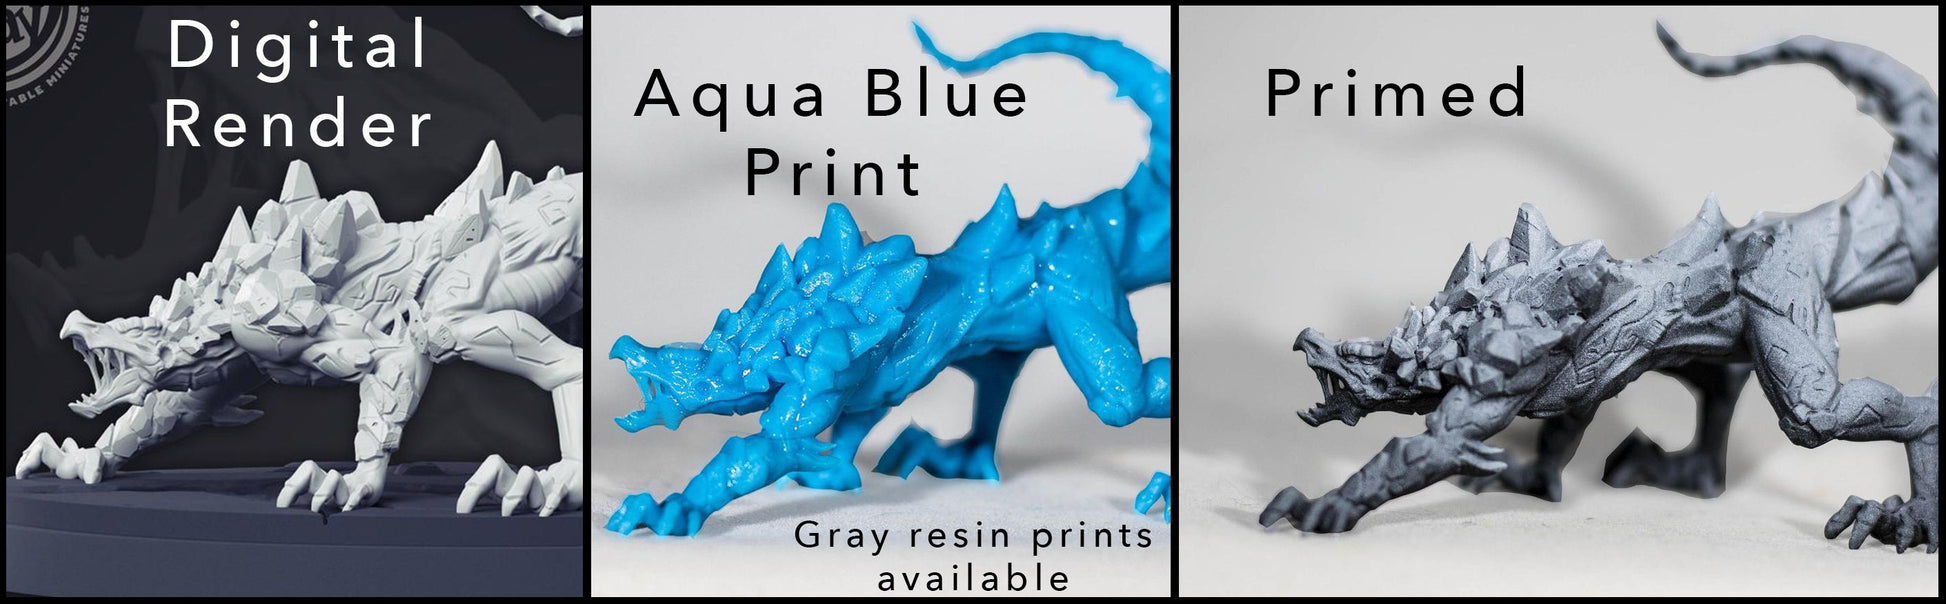 Water Elemental - 180mm Lord of the Print Miniature | Dungeons & Dragons | Pathfinder | Tabletop